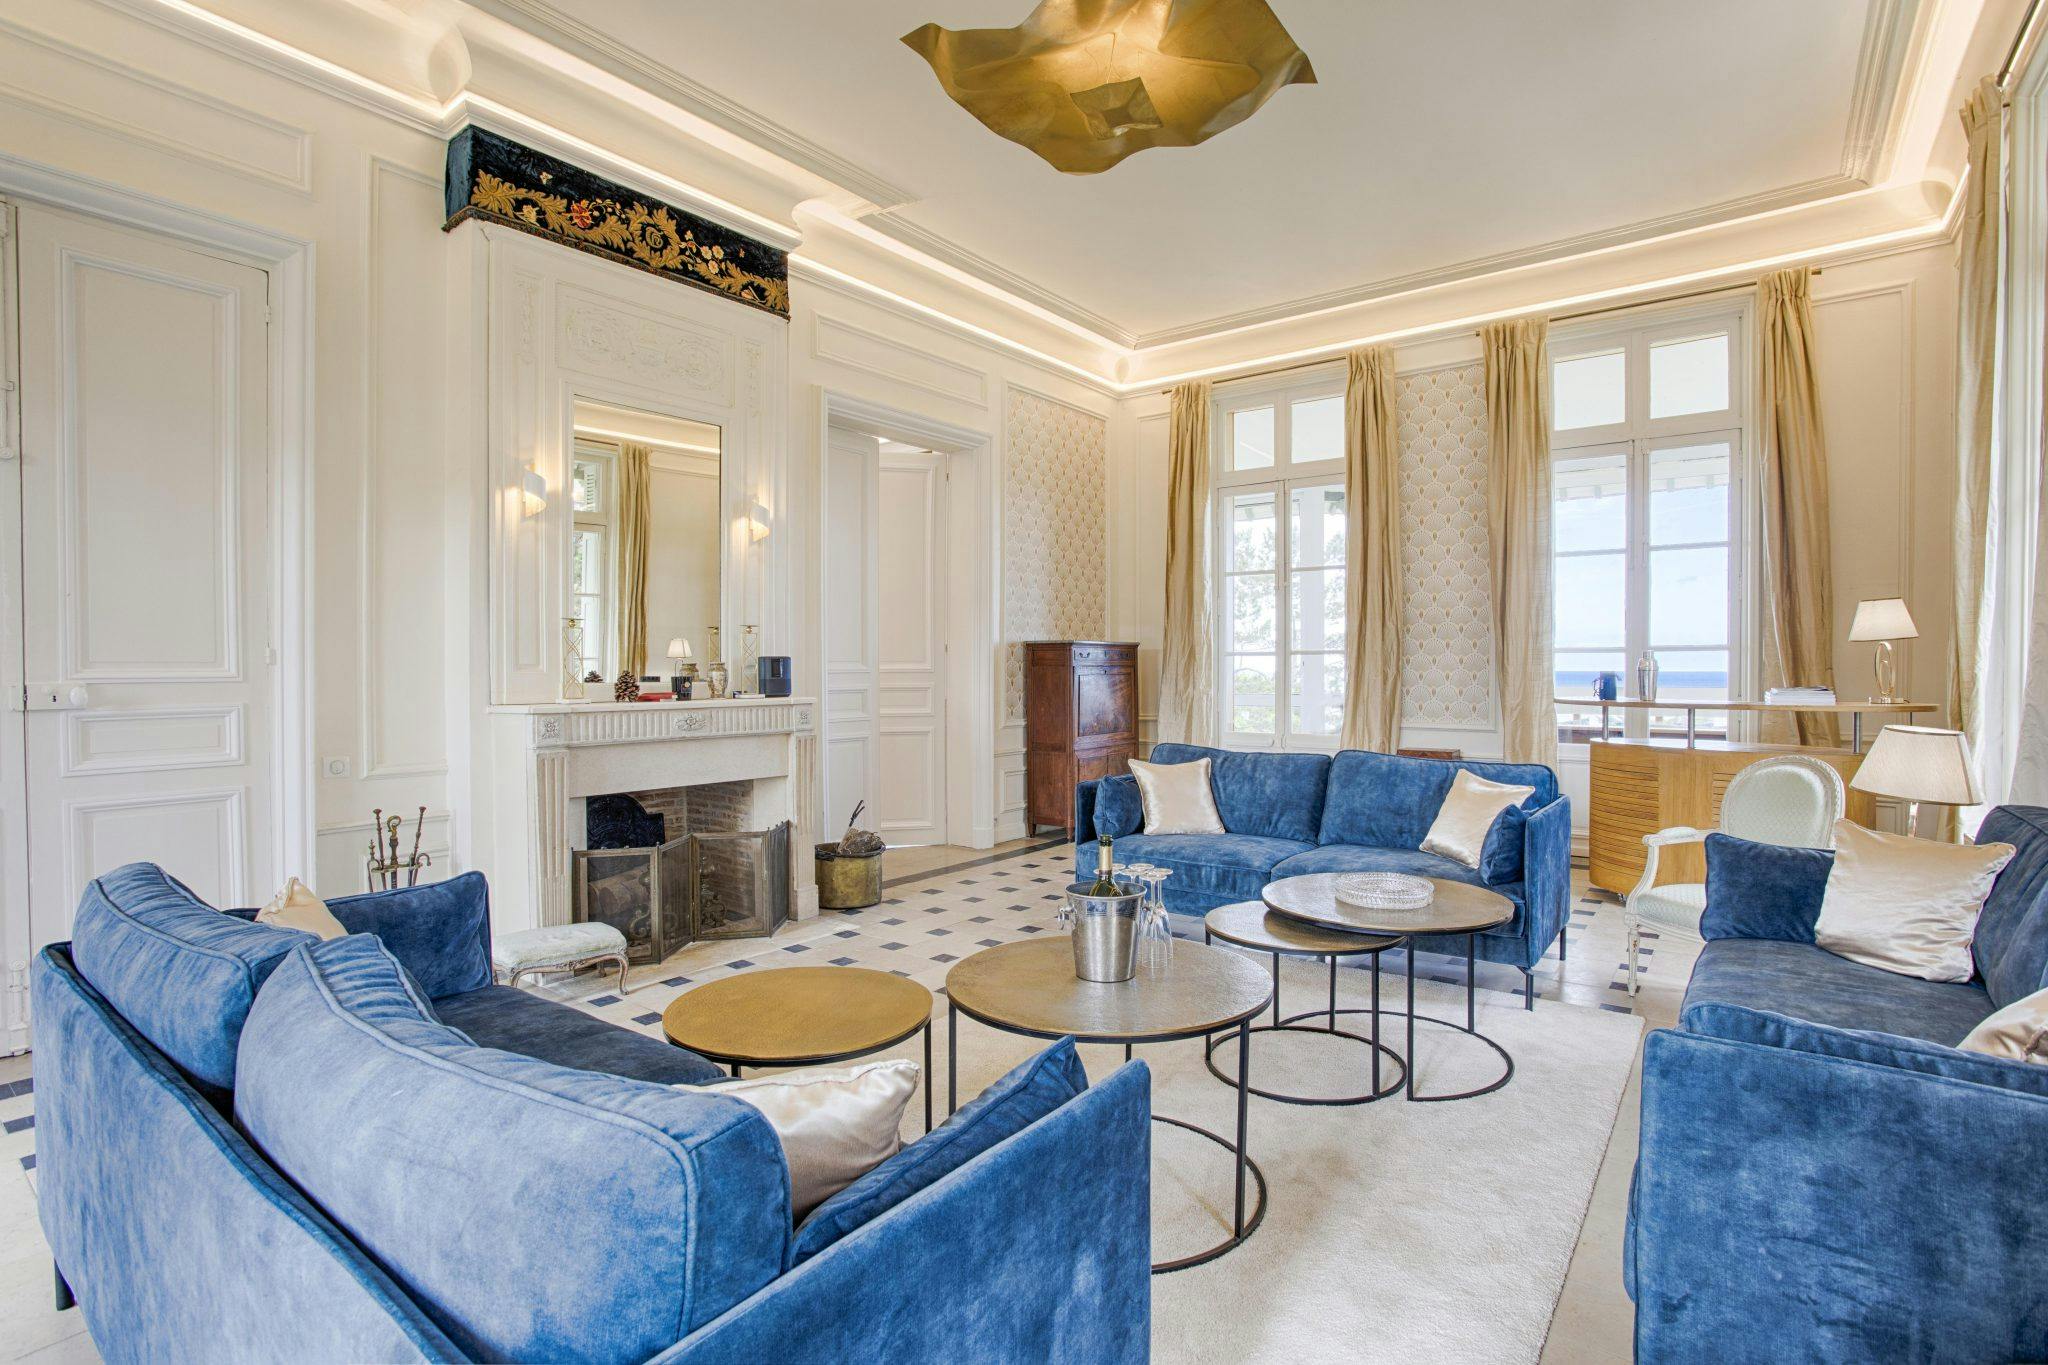 The living room at the Abbaye de Deauville, between tradition and modernity, blue sofas and fireplace